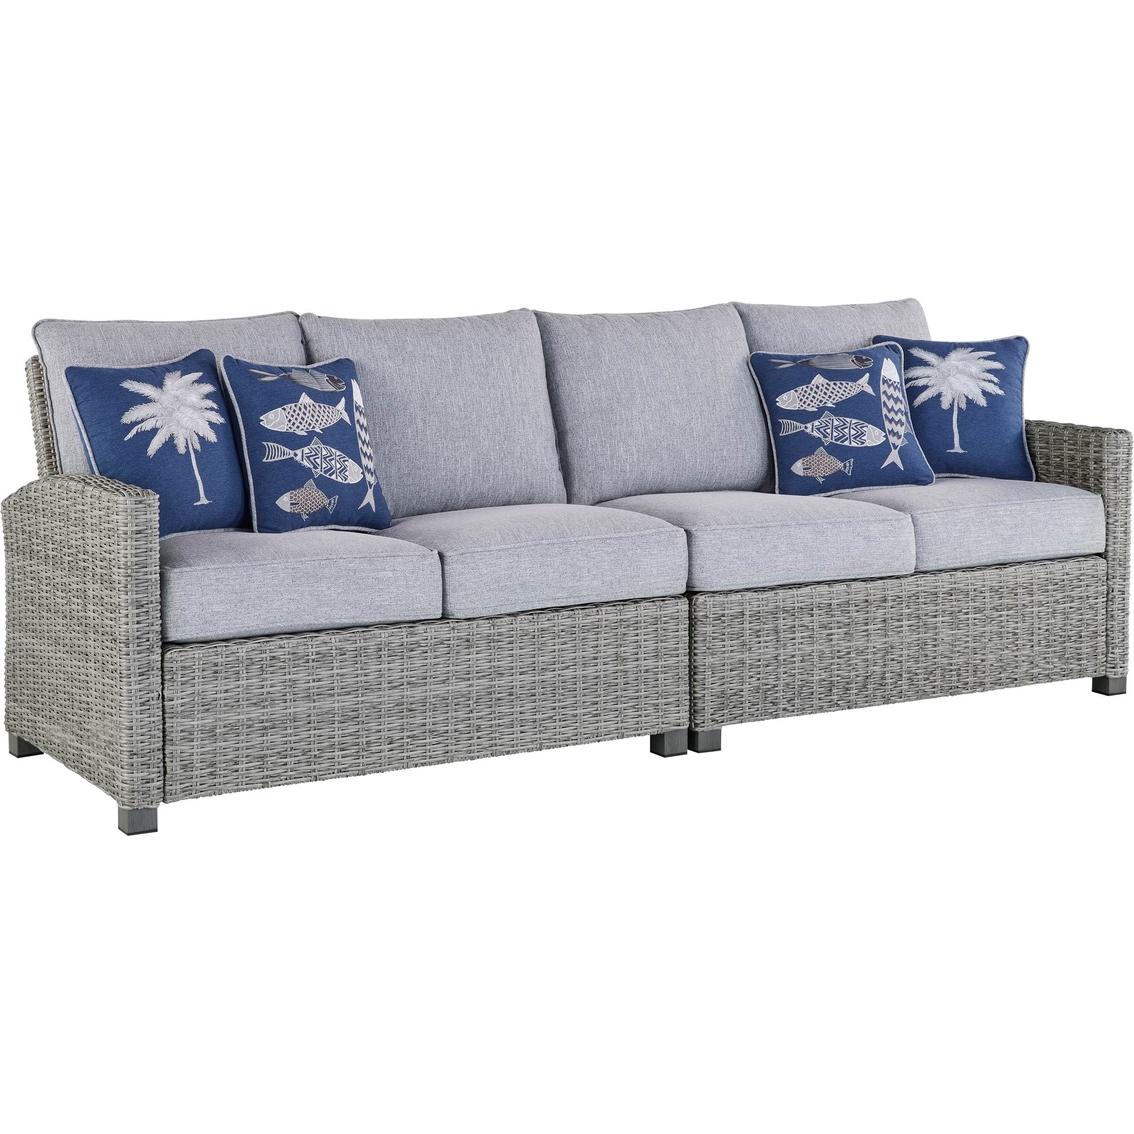 Signature Design by Ashley Naples Beach Outdoor 3 pc. Sectional with 2 End Tables - Image 2 of 5